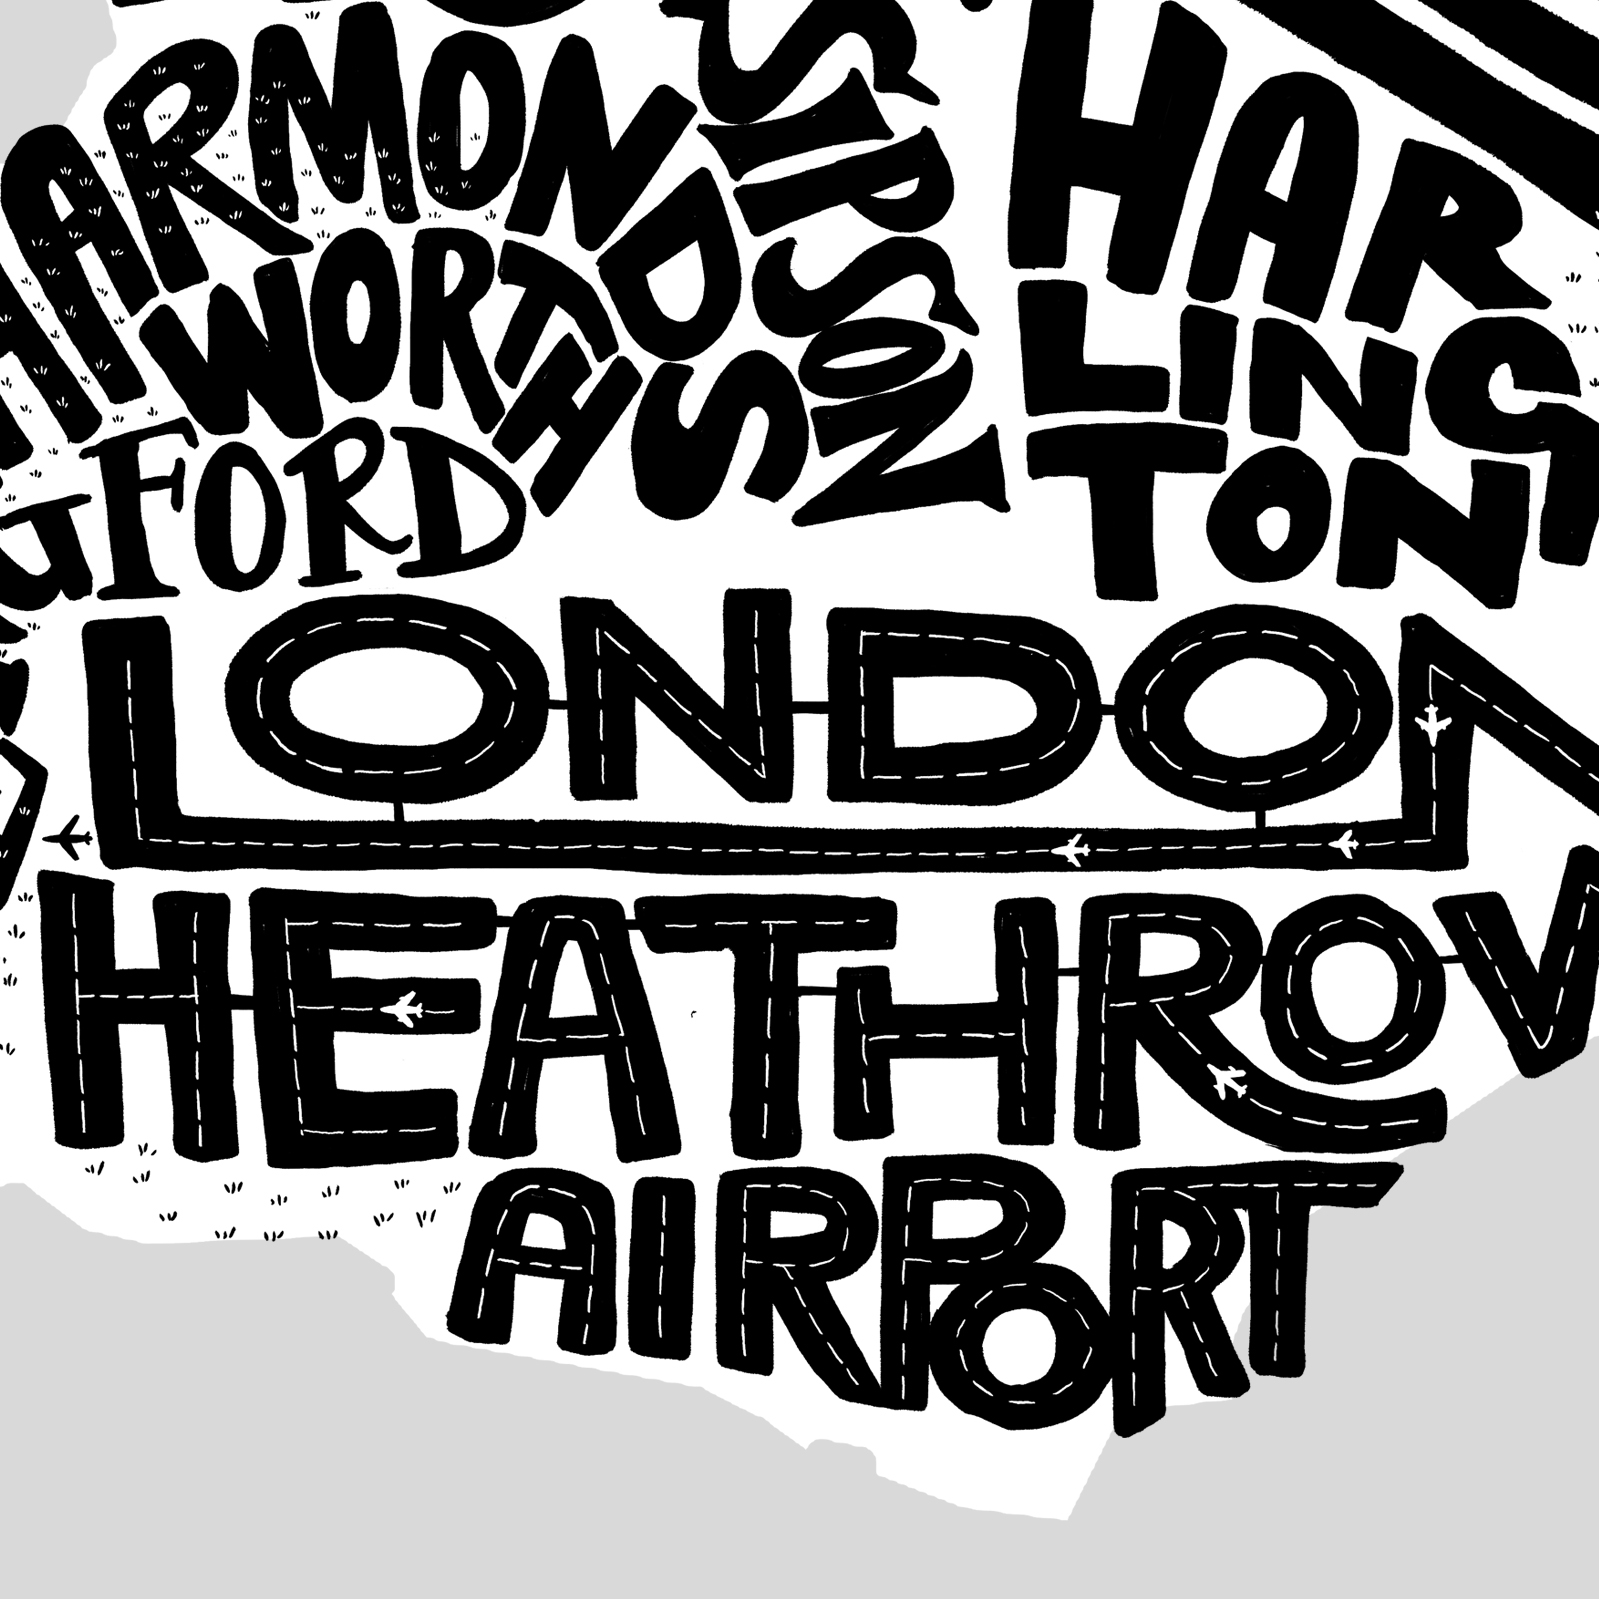 Detail of the Big London Type Map showing hand lettering to create London Heathrow Airport